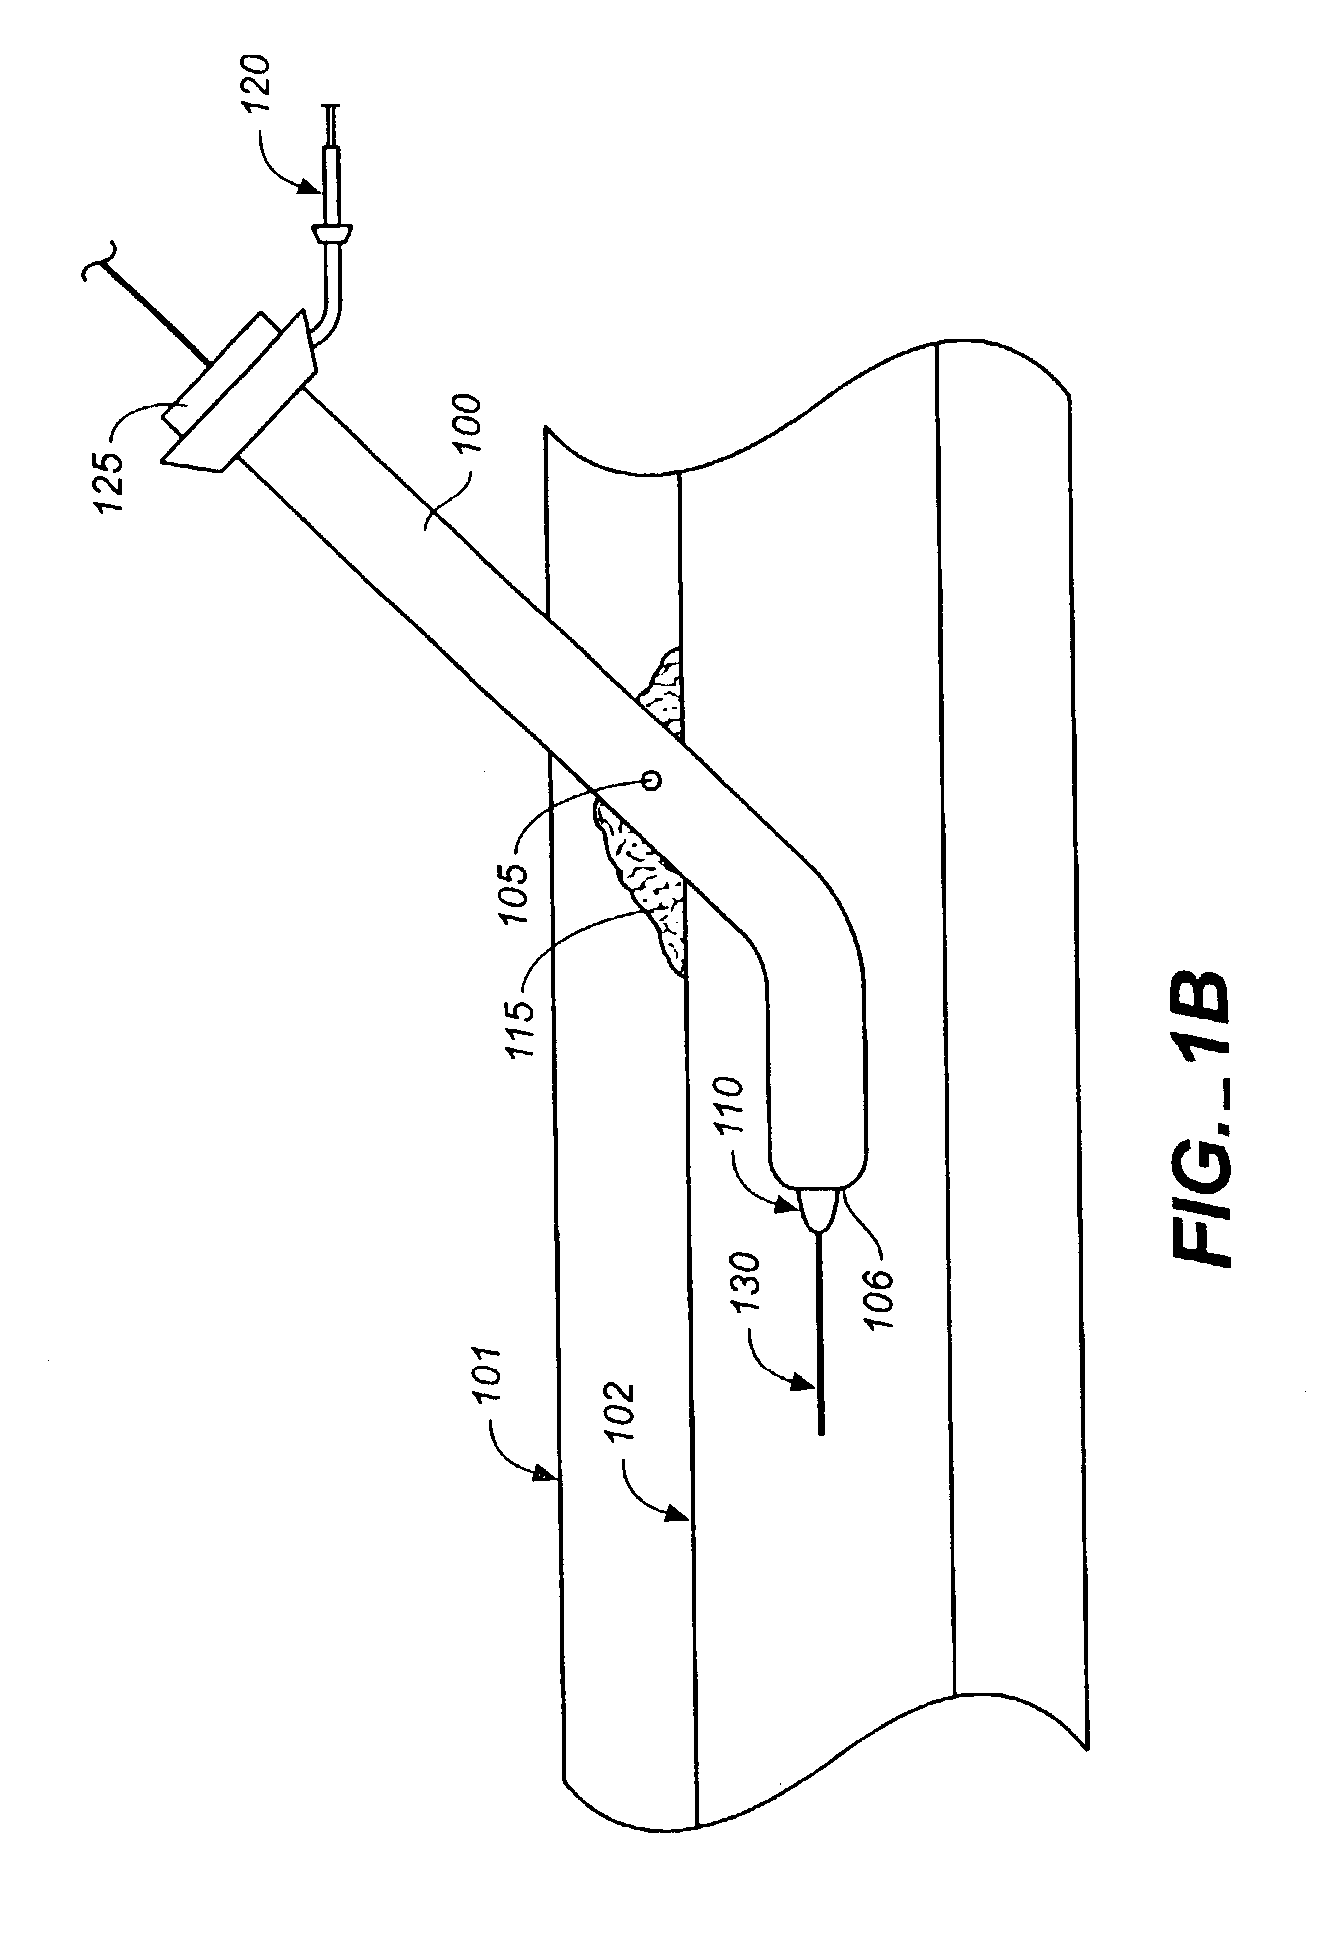 Vascular sealant delivery device and sheath introducer and method